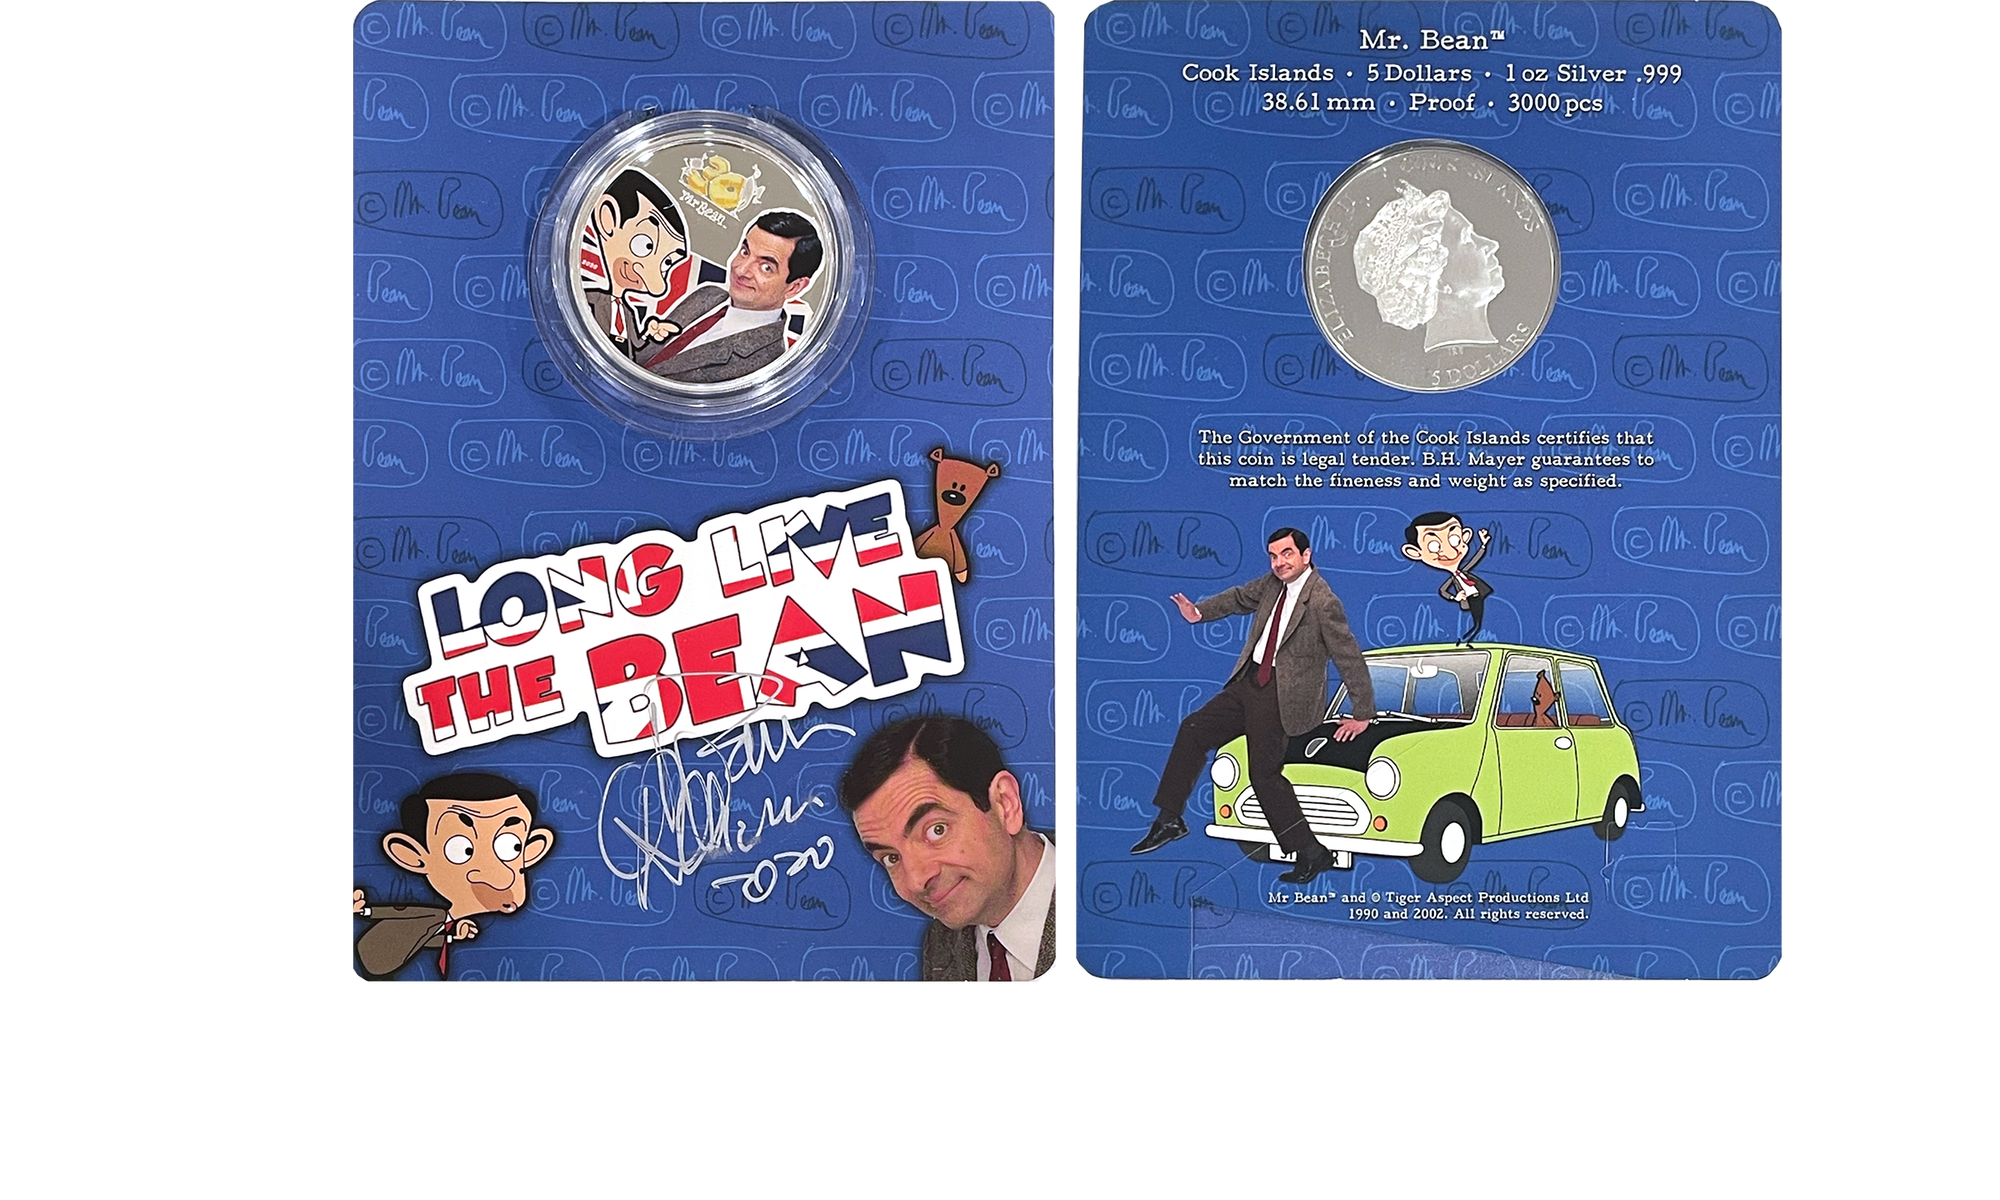 Autographed Mr. Bean 30th Anniversary 1oz Silver Coin